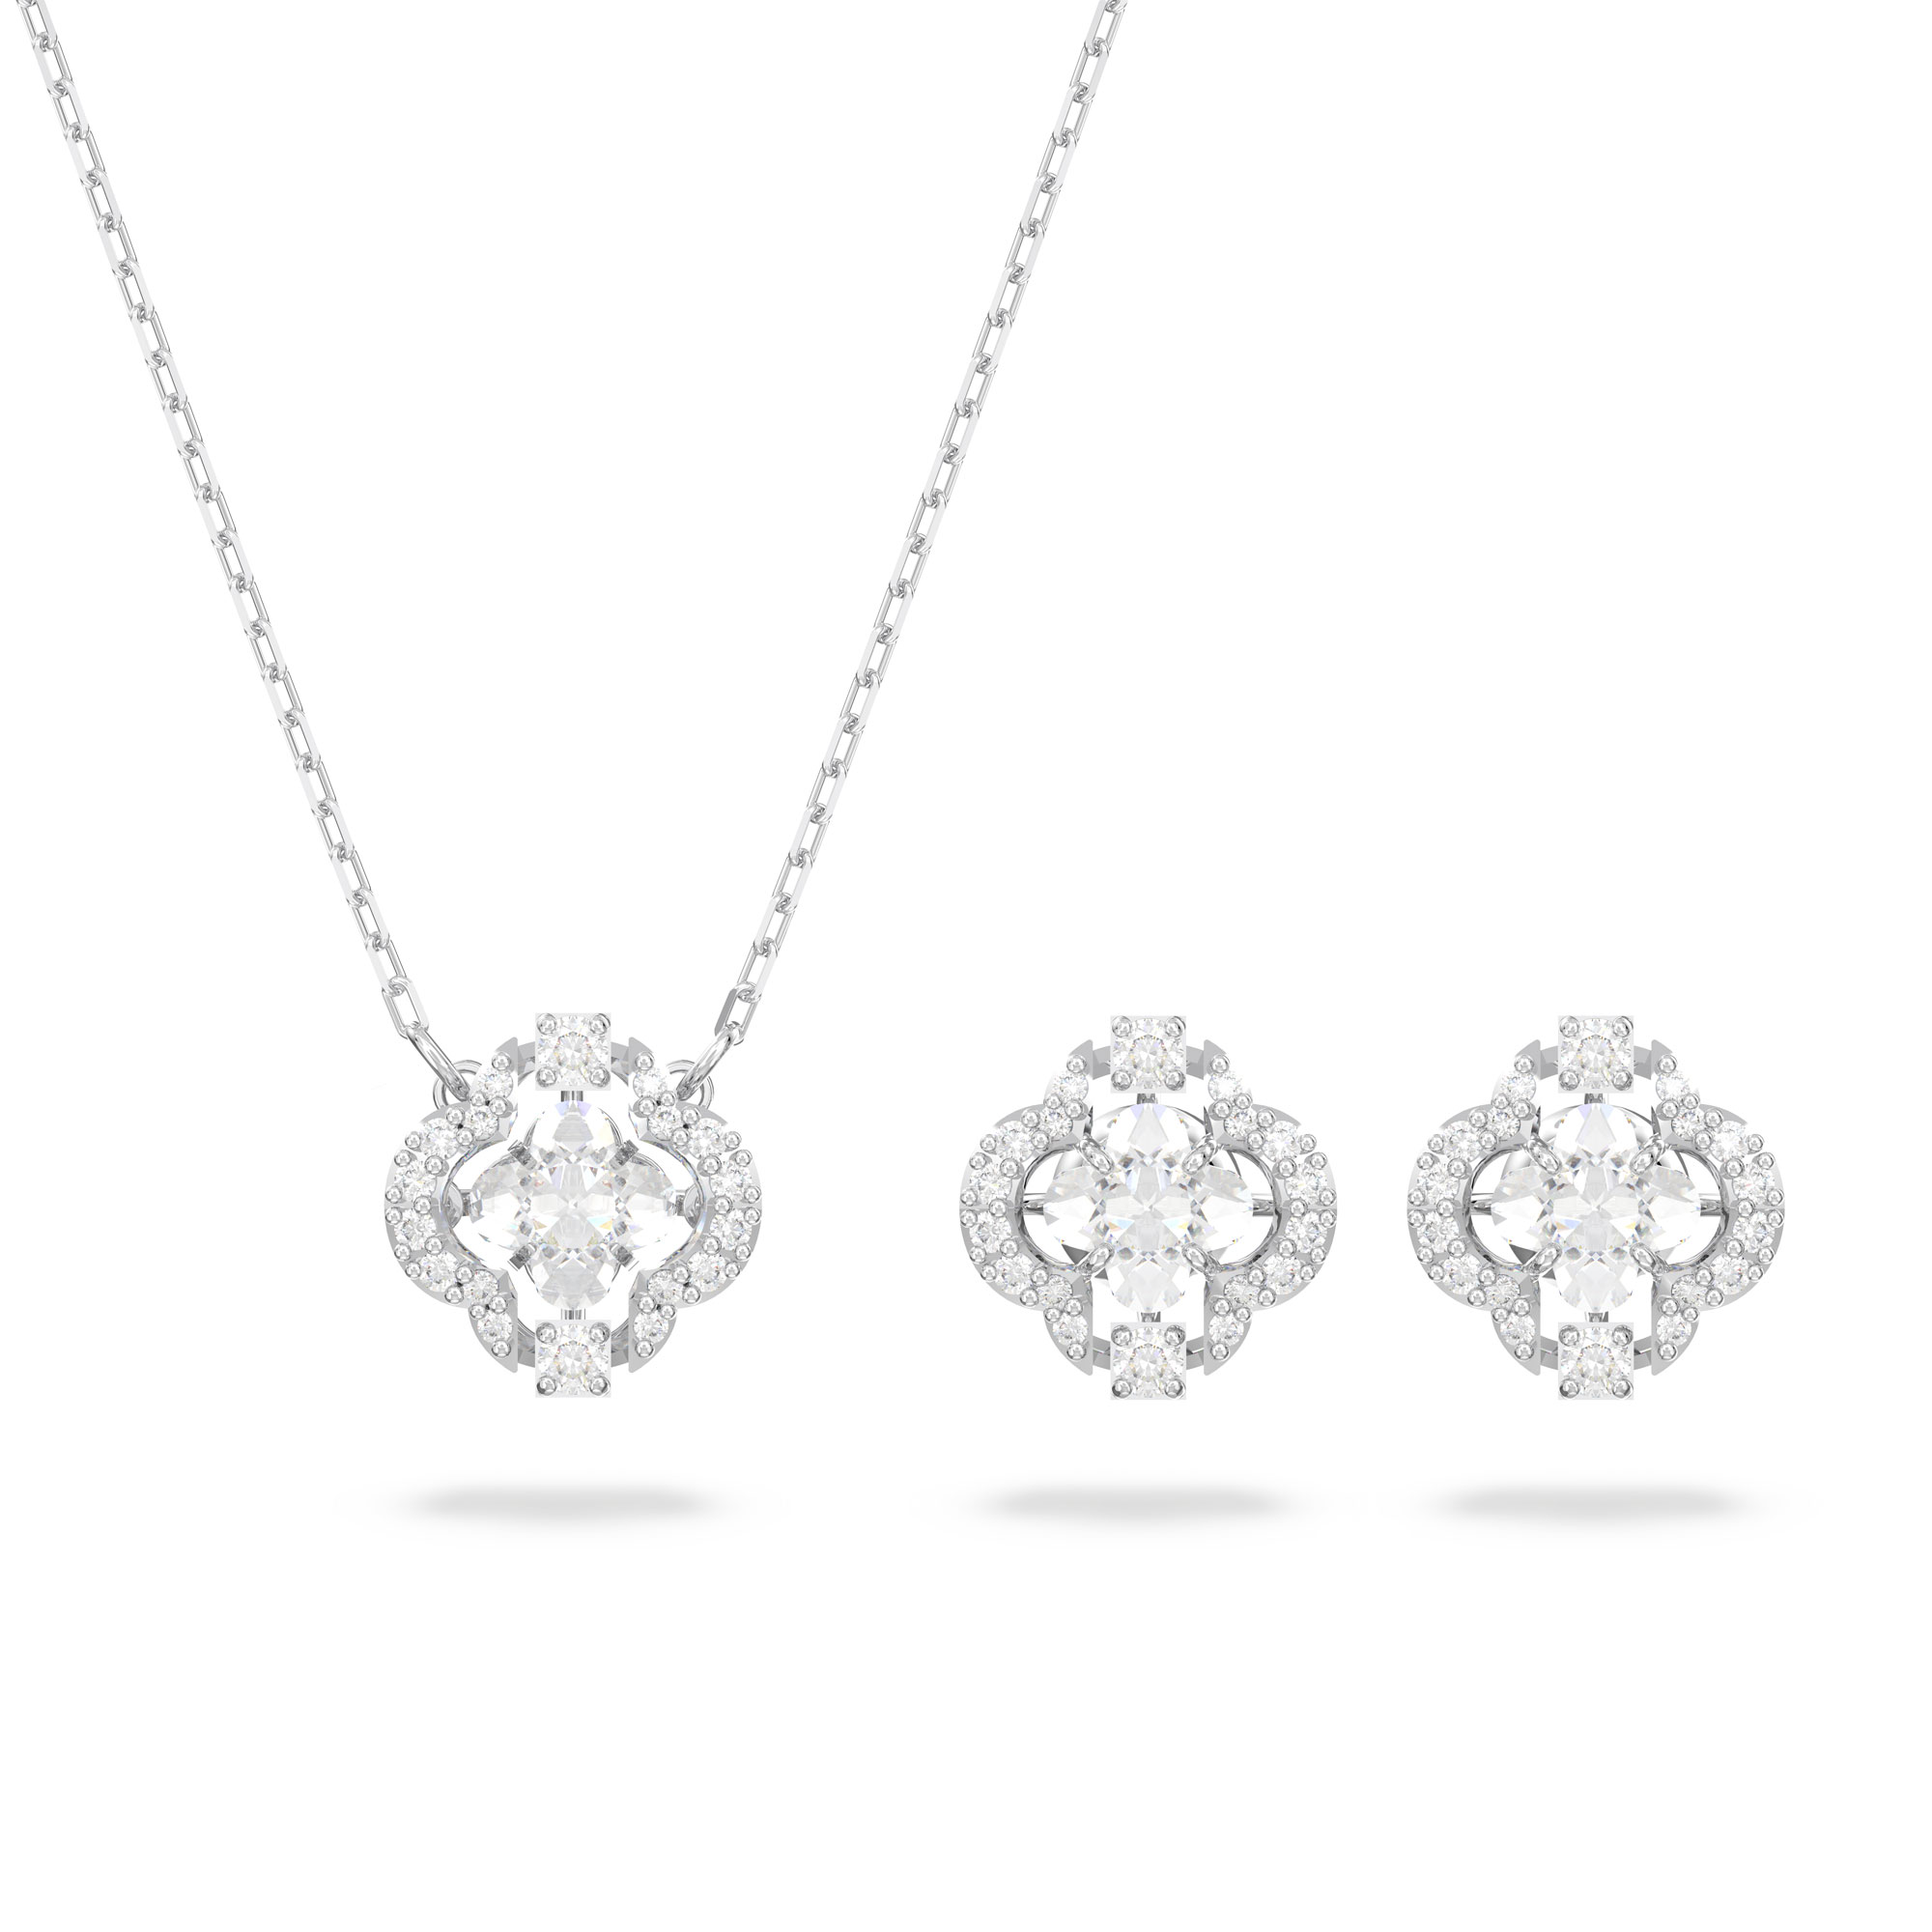 fysiek aan de andere kant, incompleet Swarovski Crystal and Zirconia Sparkling Dance Rhodium-Plated Necklace and  Earrings Set | REEDS Jewelers